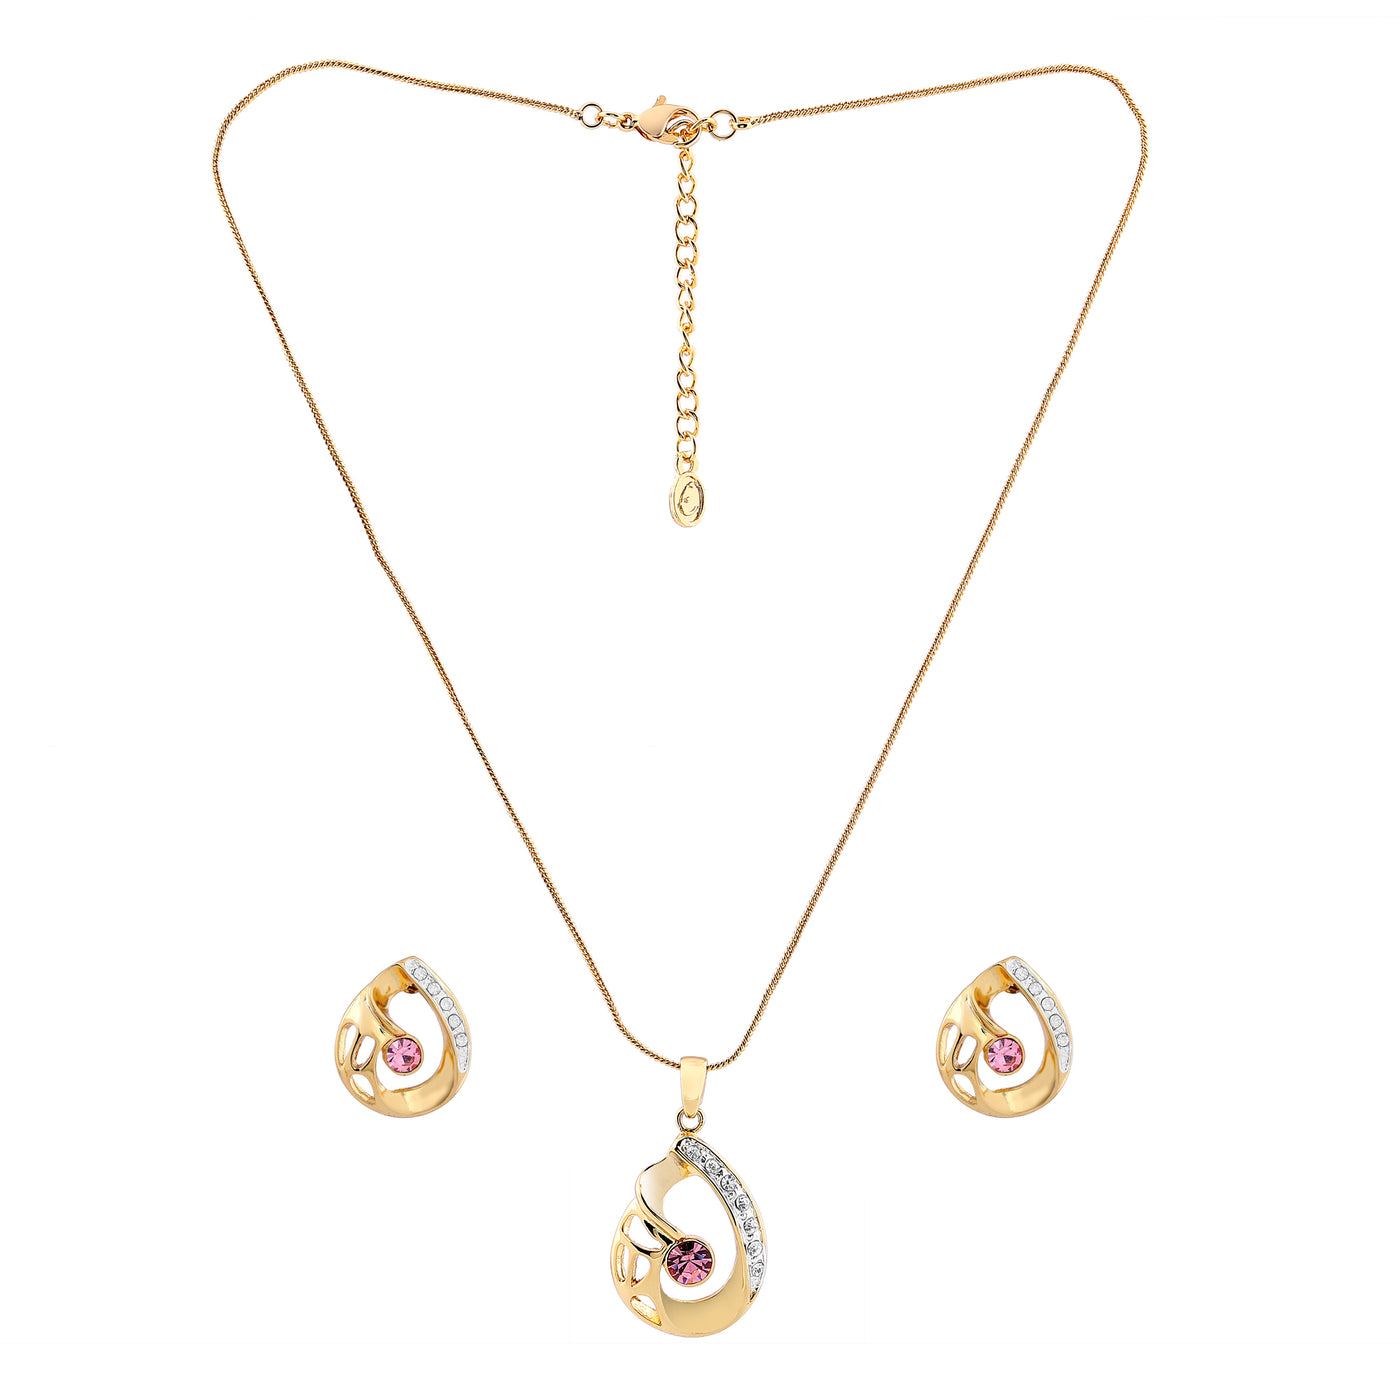 Estele 24 Kt Gold and Silver Plated Loop with Austrain Crystal Pendant Set for Women